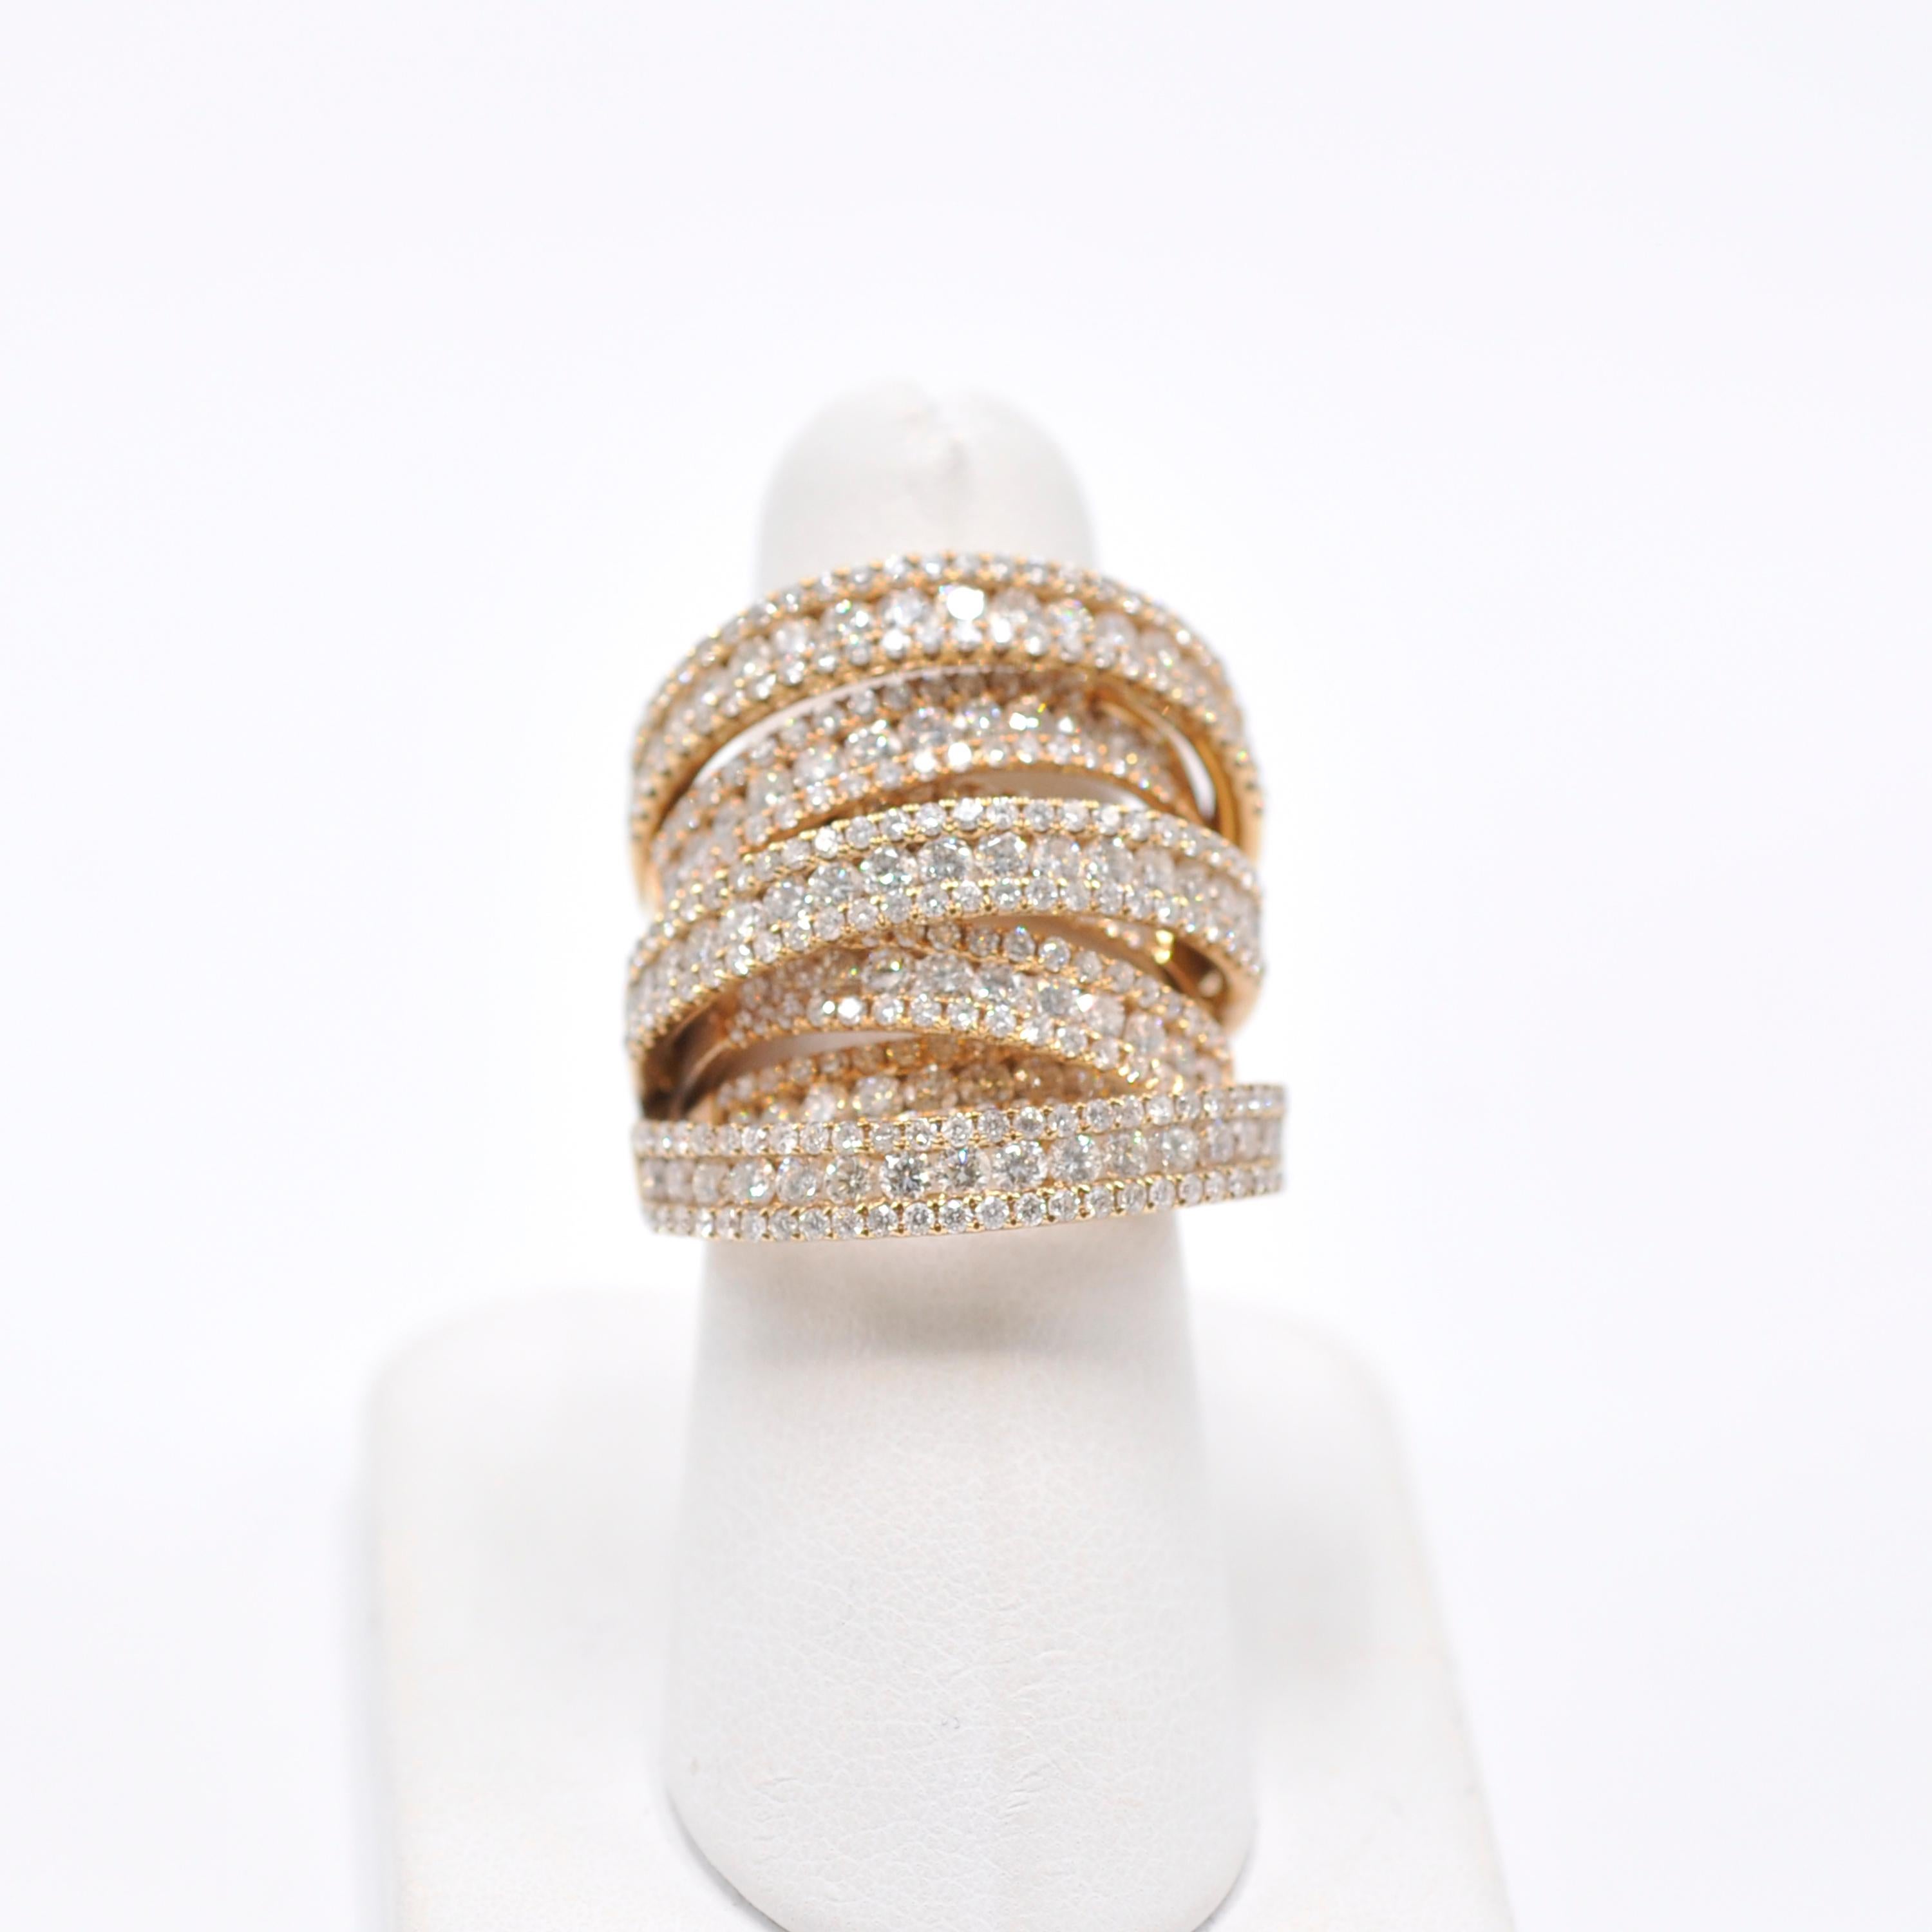 This edgy take on the diamond band overlaps seven 18 karat yellow gold bands of a total of 8 CTS of round cut diamonds. The bands taper down under the finger for comfort making this ring versatile. Wear it to dress up your favorite jeans or to spice